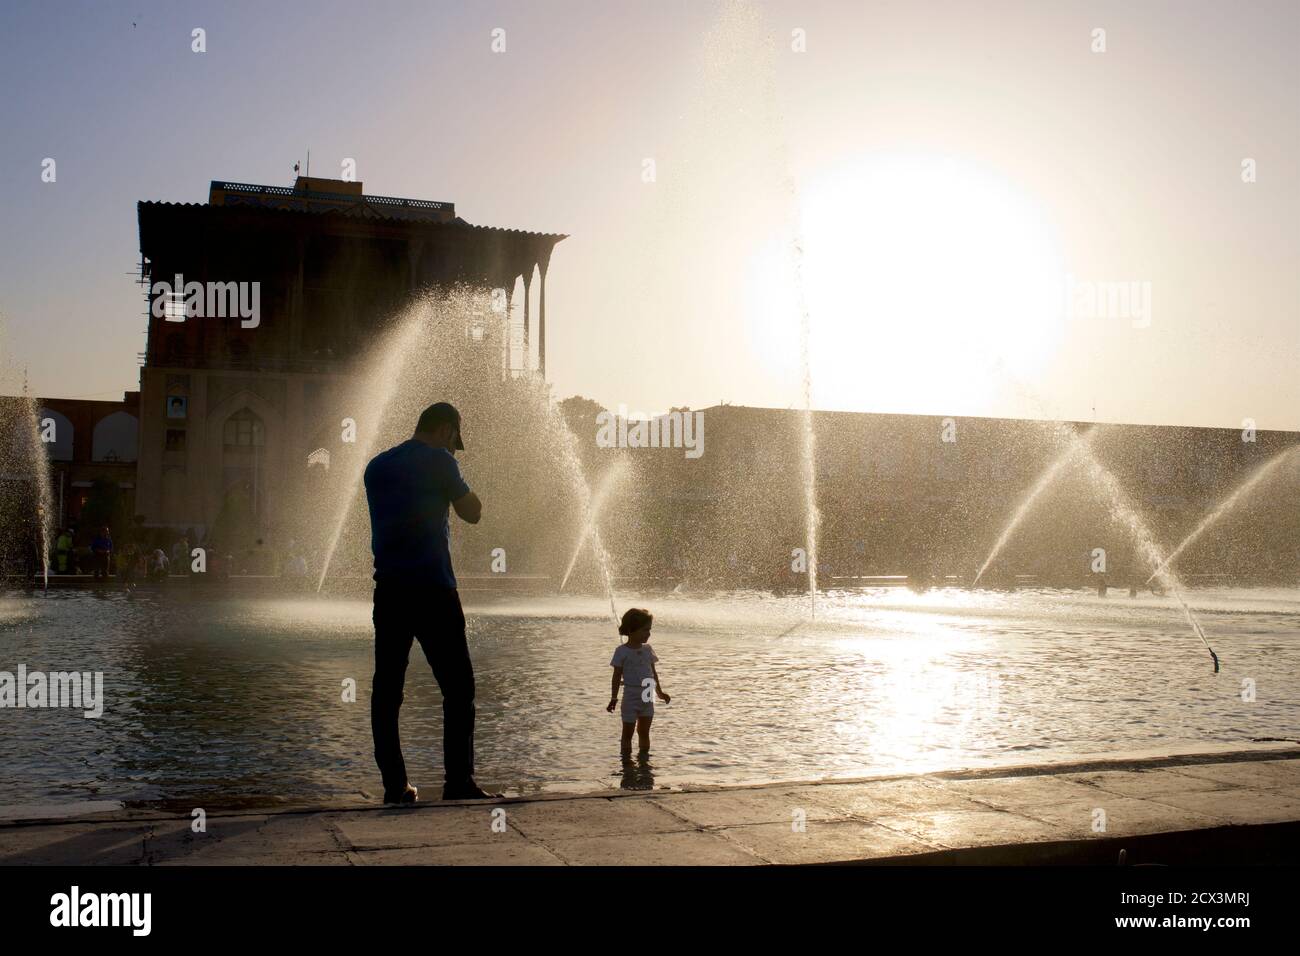 Ali Qapu Palace and public fountains in Naqsh-e Jahan Square. Imam Square, Isfahan city, Iran. Iranian father and child Stock Photo